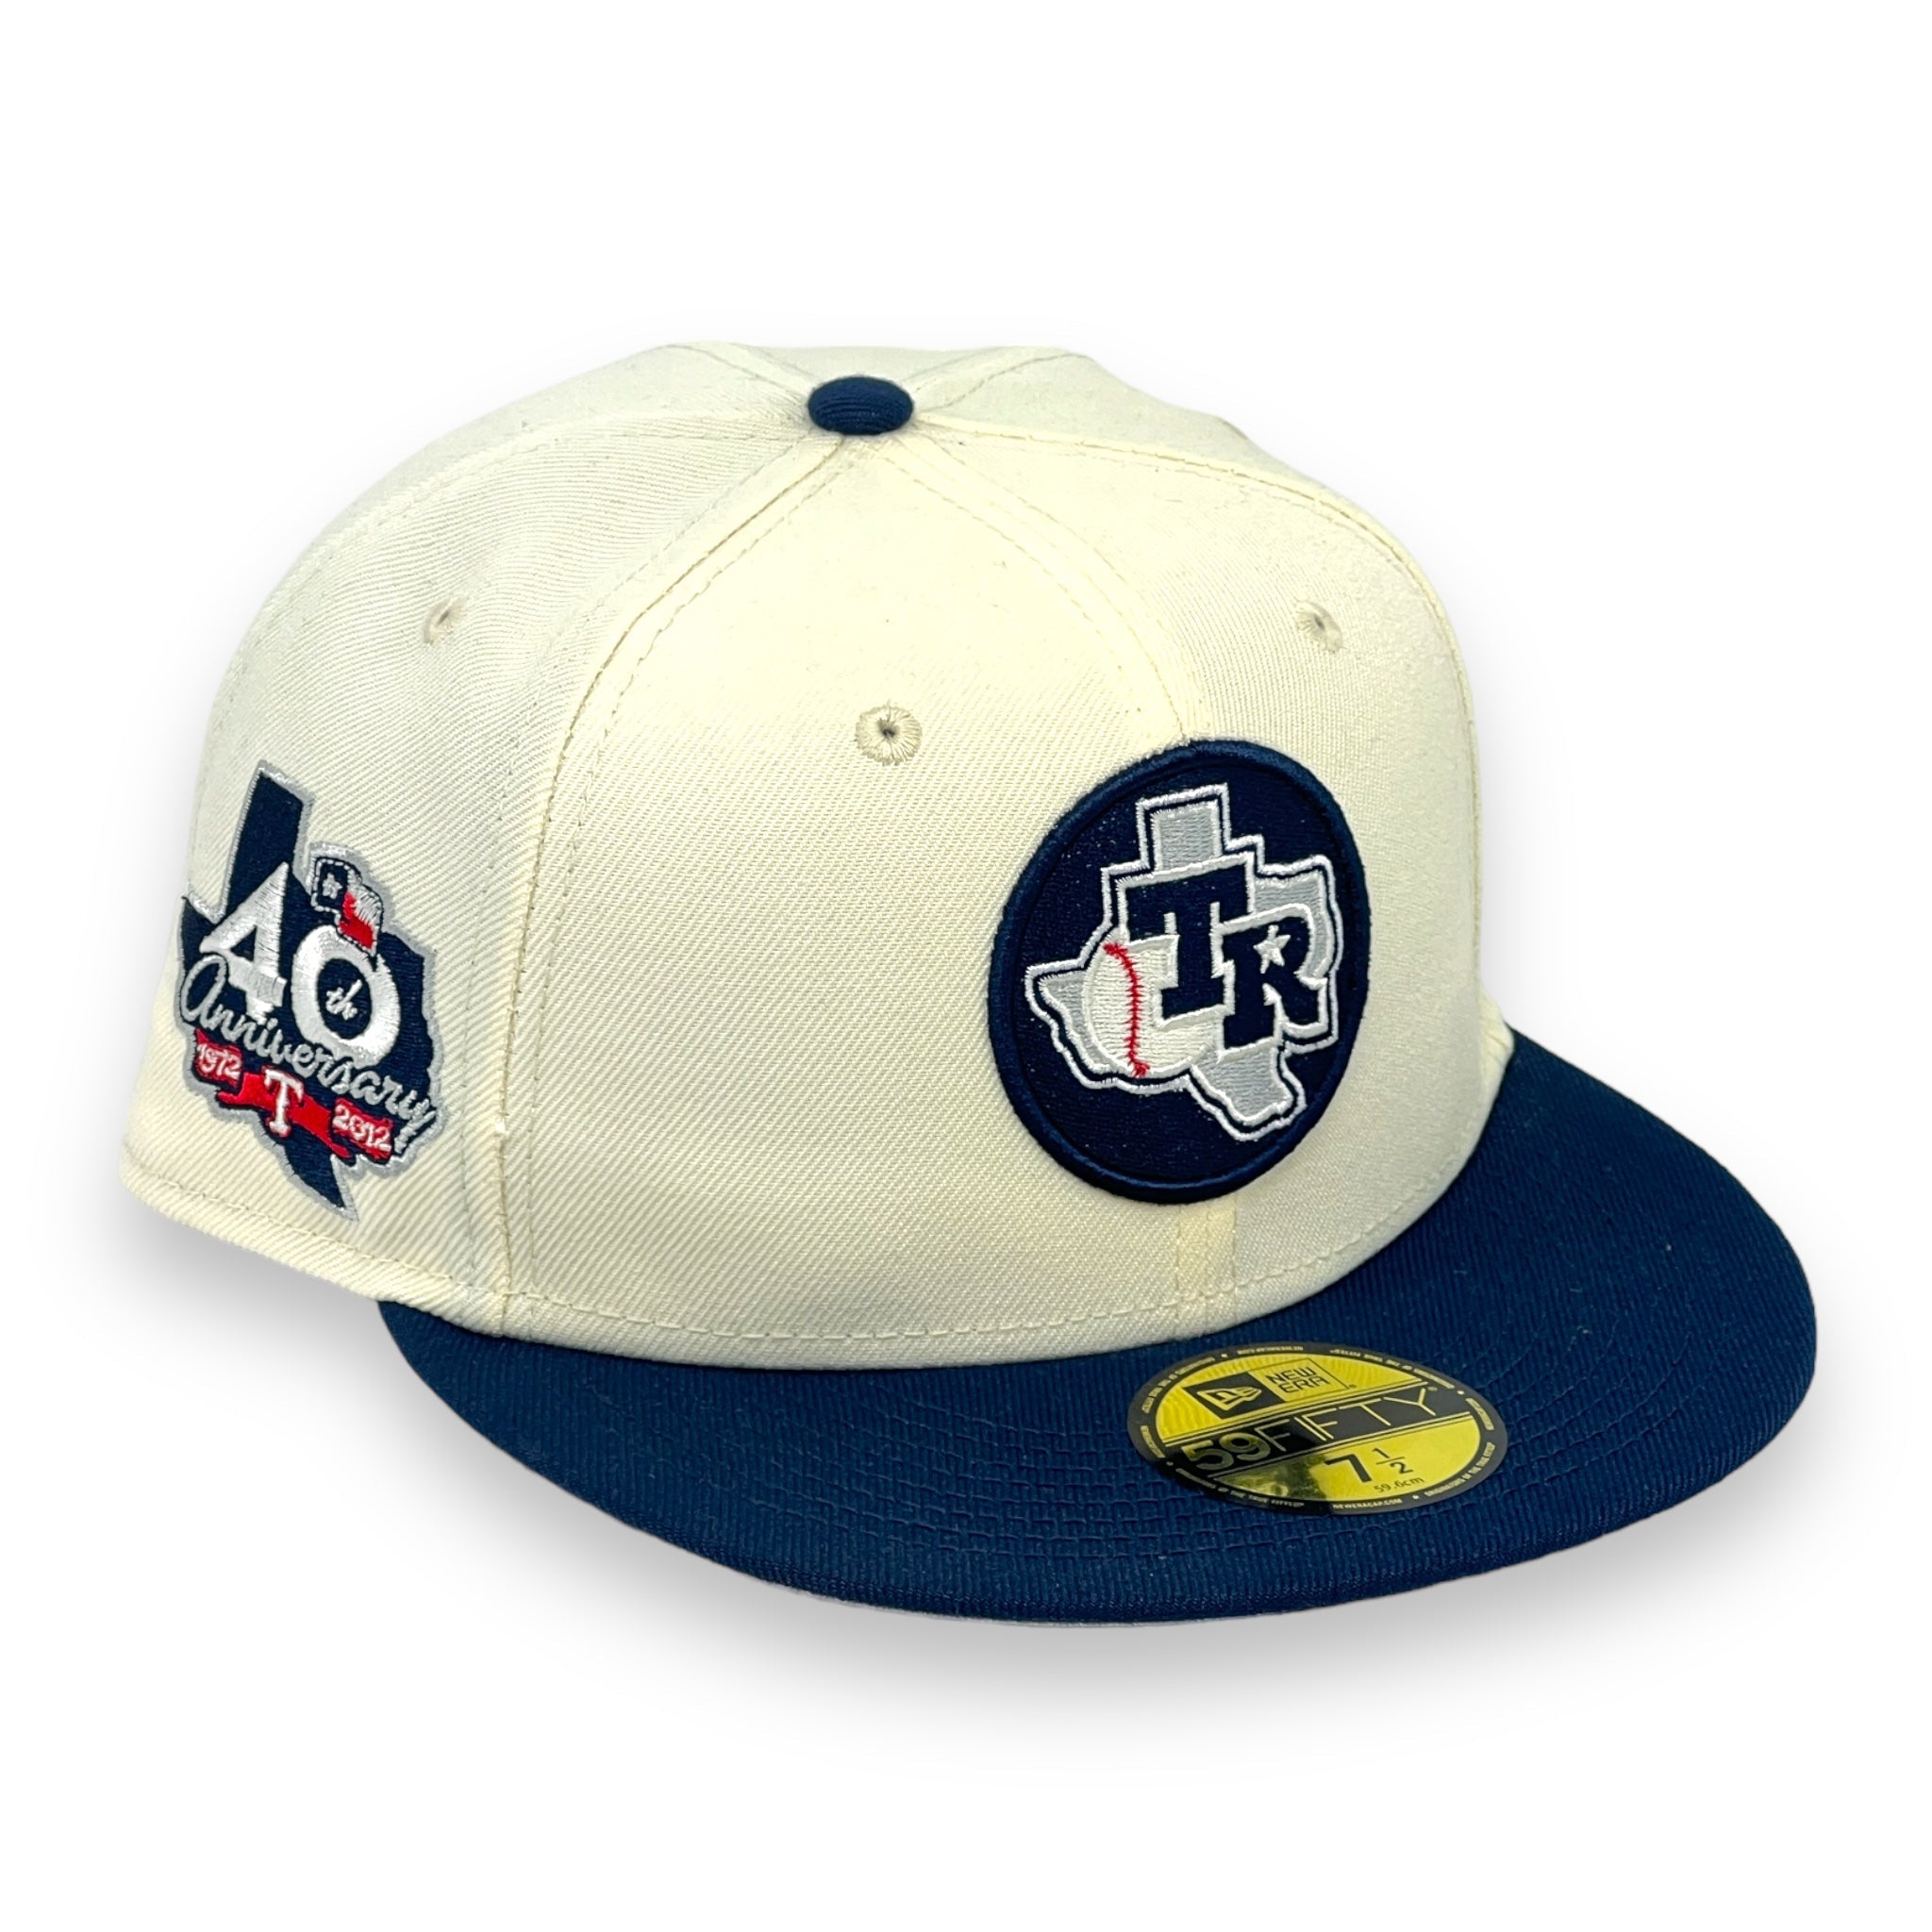 TEXAS RANGERS (OFF-WHITE) (40TH ANN) NEW ERA 59FIFTY FITTED